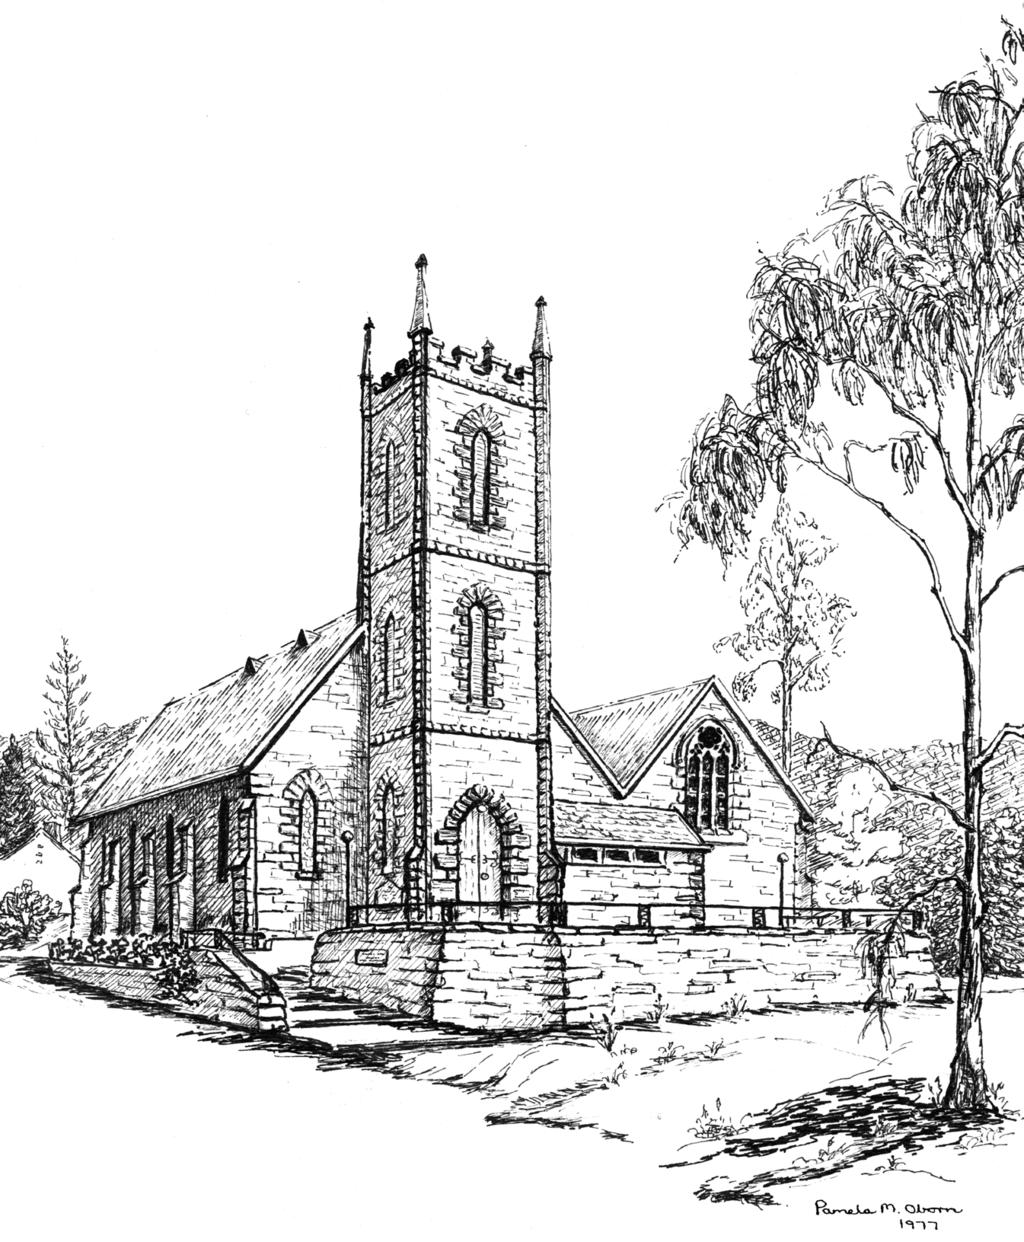 THE ANGLICAN CHURCH OF ST MICHAEL